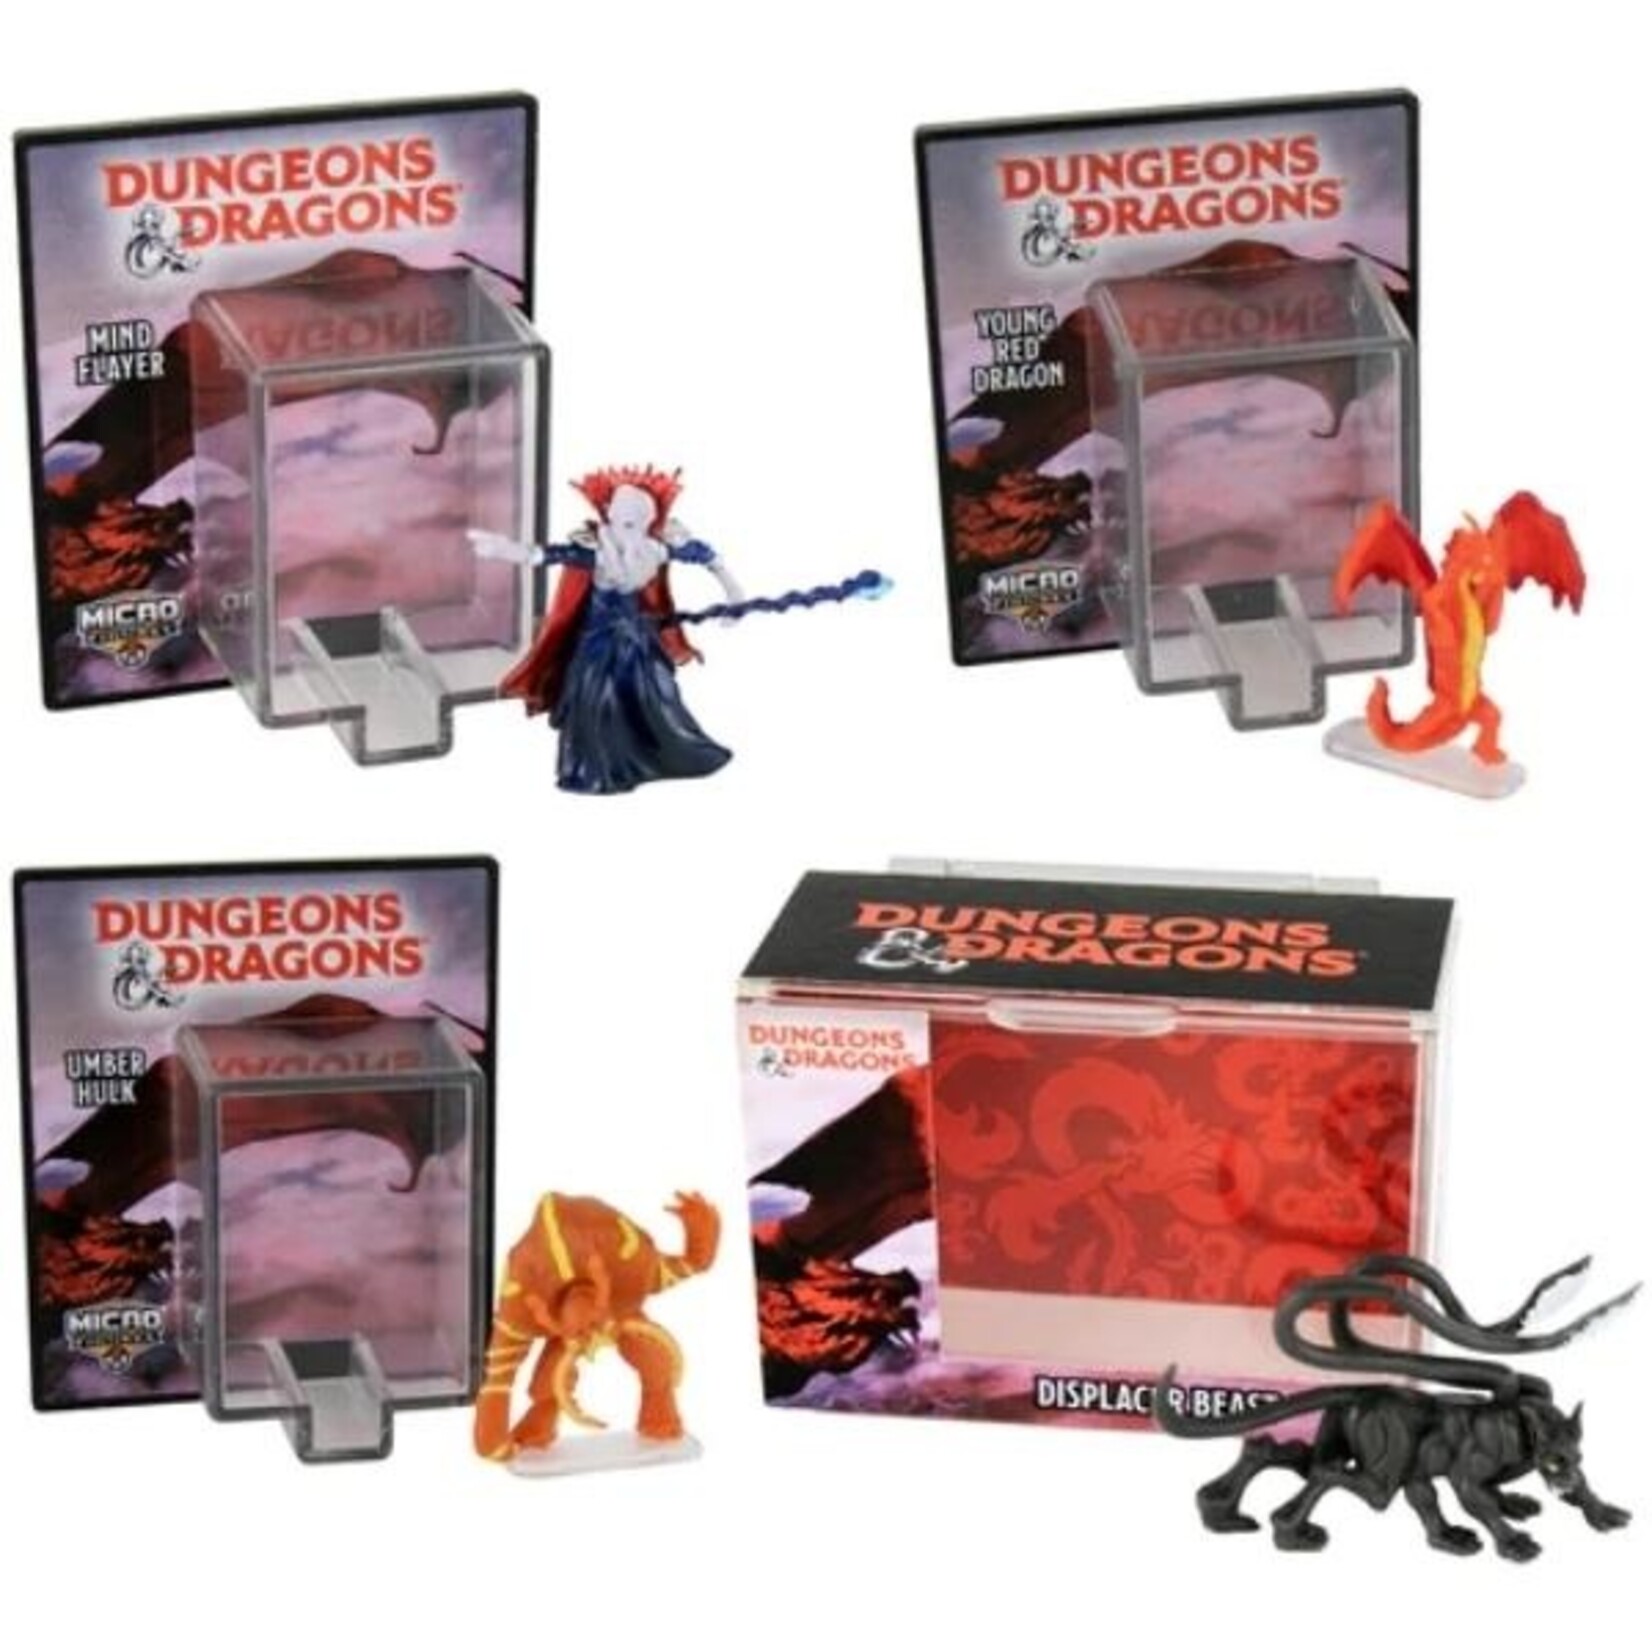 Dungeons & Dragons World's Smallest Dungeons and Dragons Micro Figures - Series 1